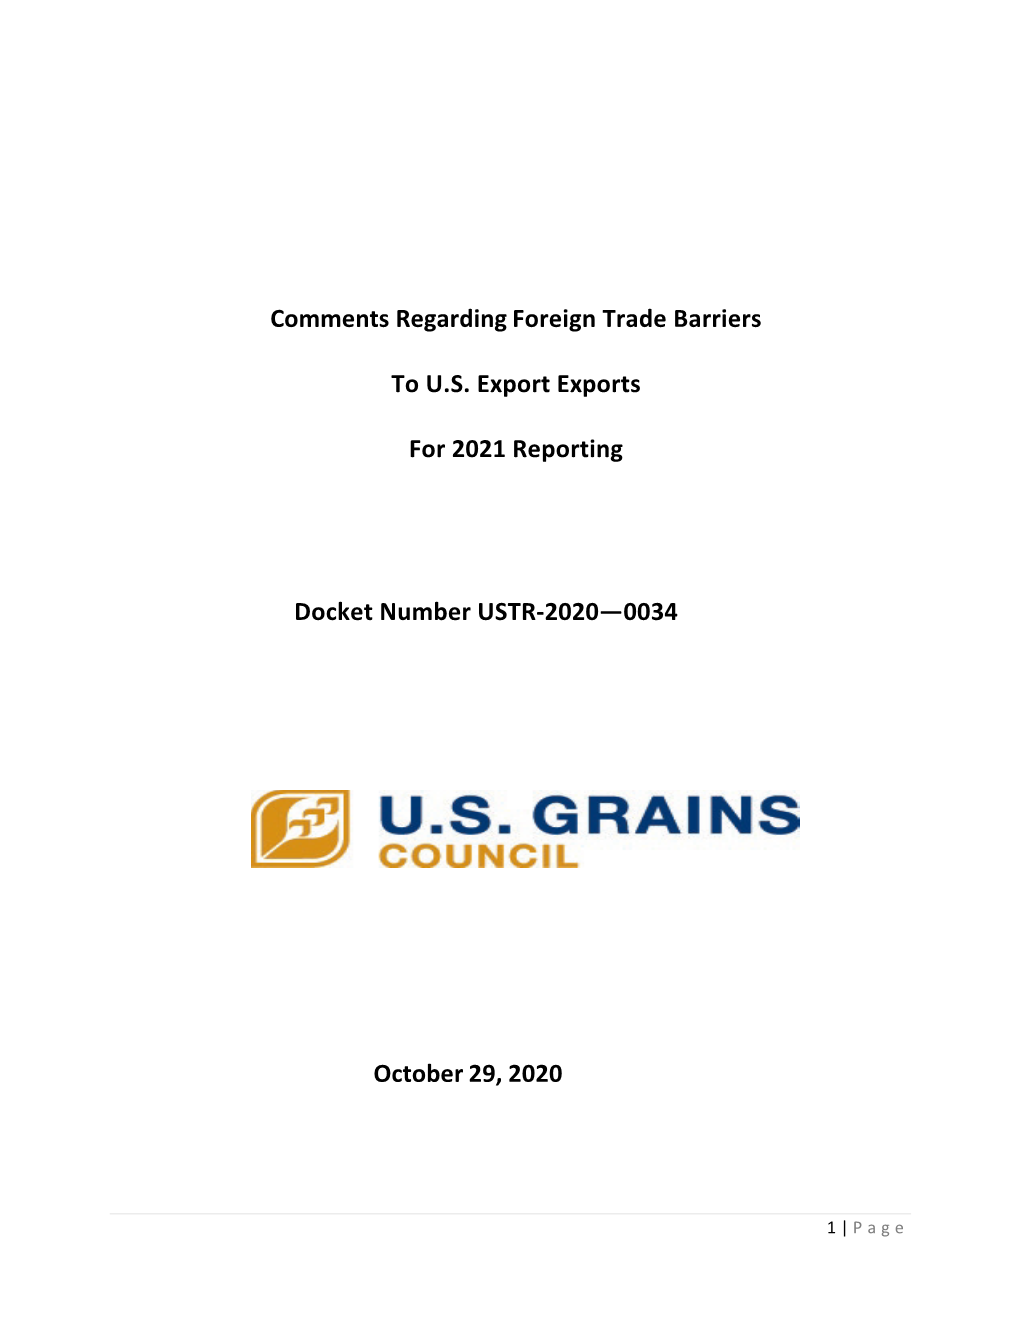 Comments Regarding Foreign Trade Barriers to U.S. Export Exports For